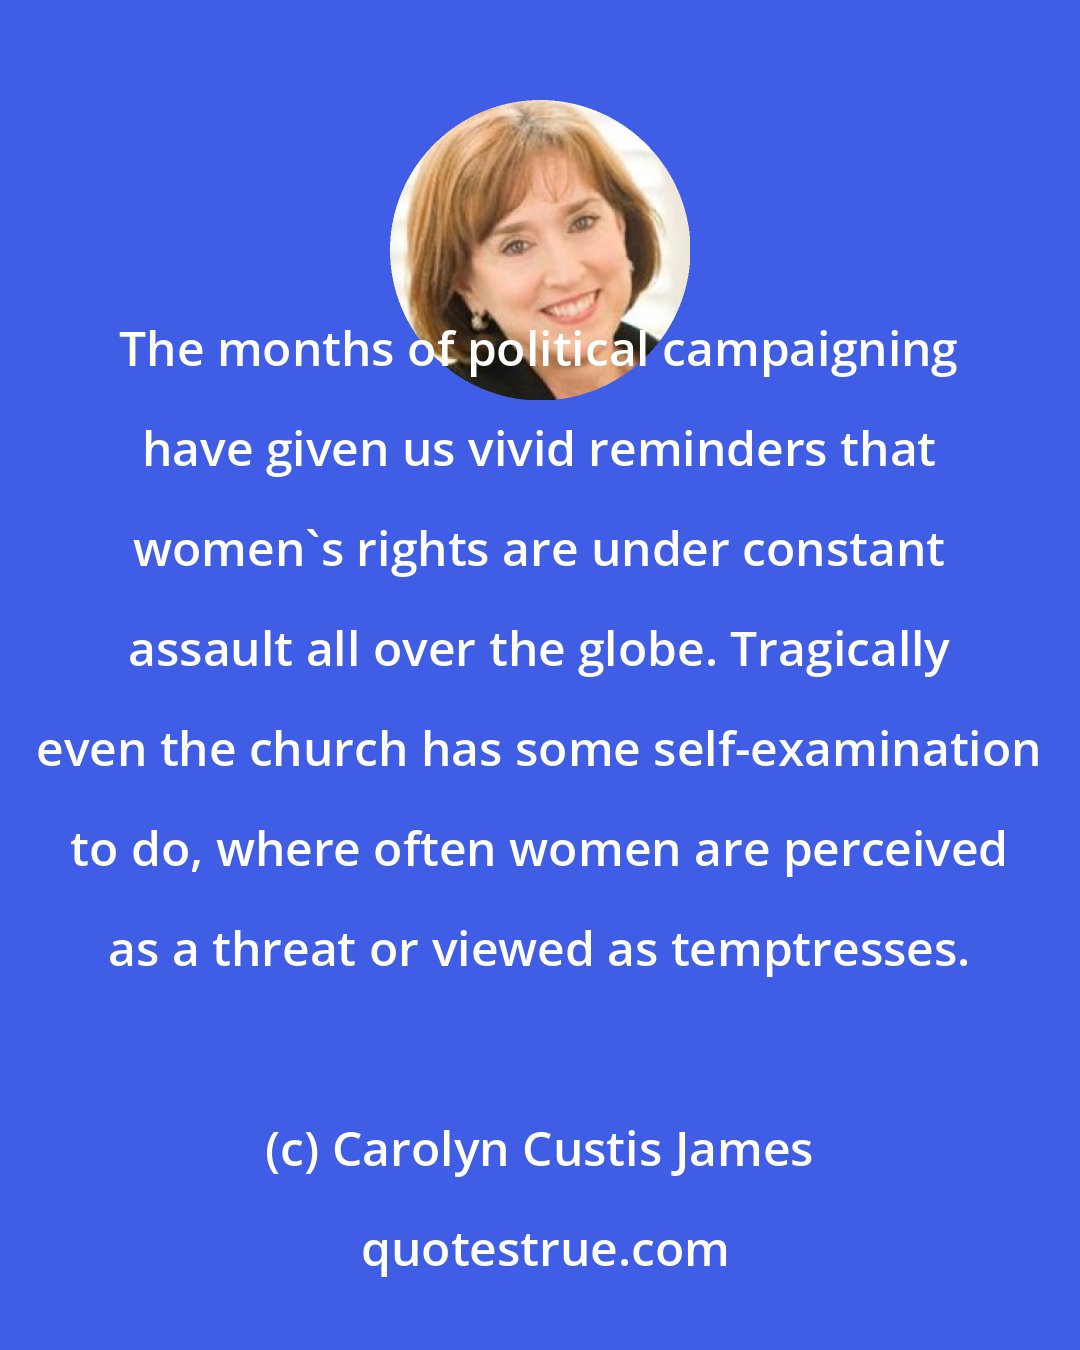 Carolyn Custis James: The months of political campaigning have given us vivid reminders that women's rights are under constant assault all over the globe. Tragically even the church has some self-examination to do, where often women are perceived as a threat or viewed as temptresses.